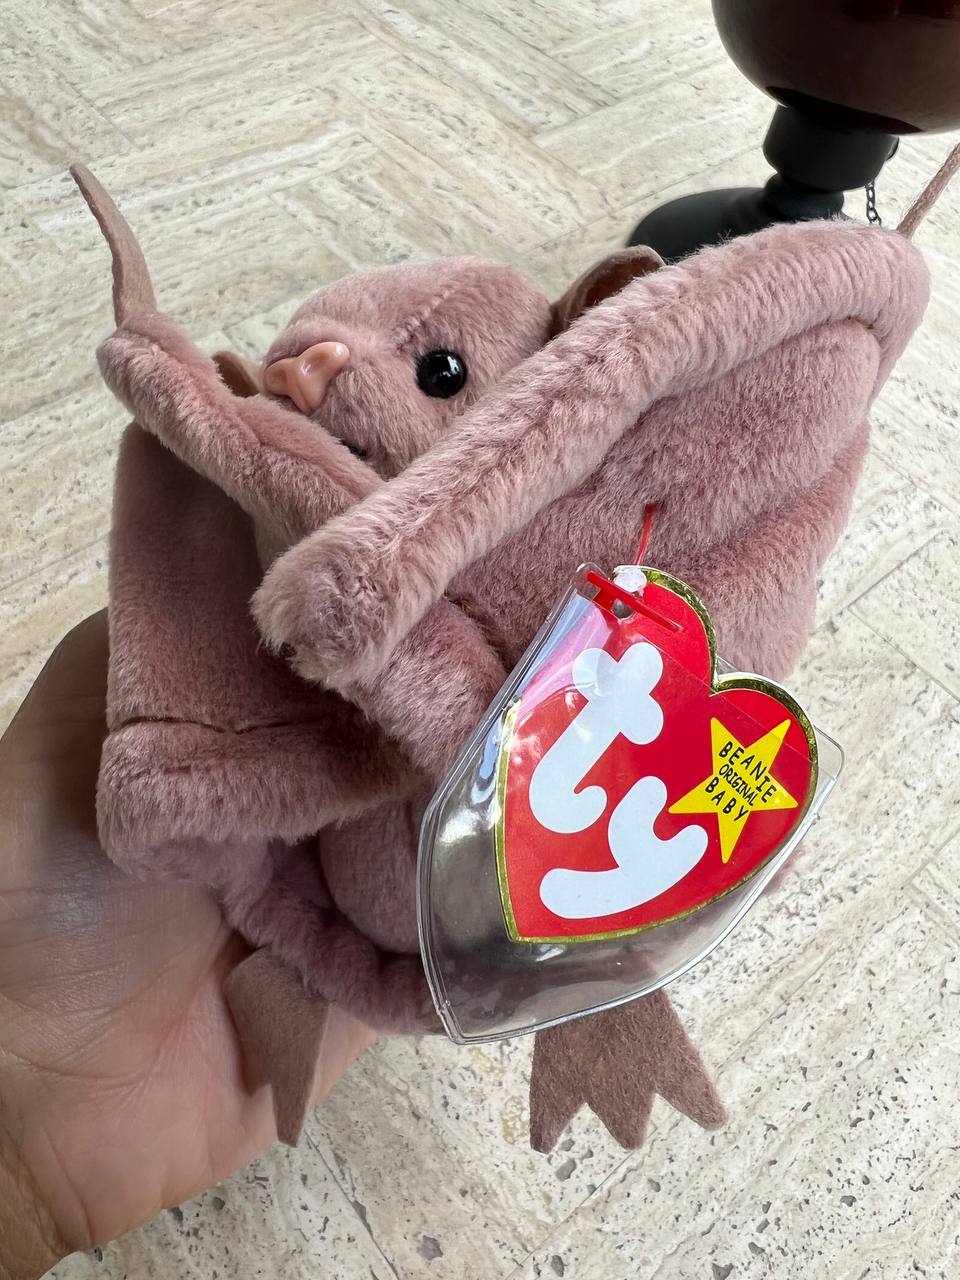 *RARE* MINT 1996 Batty Beanie Baby With Tag